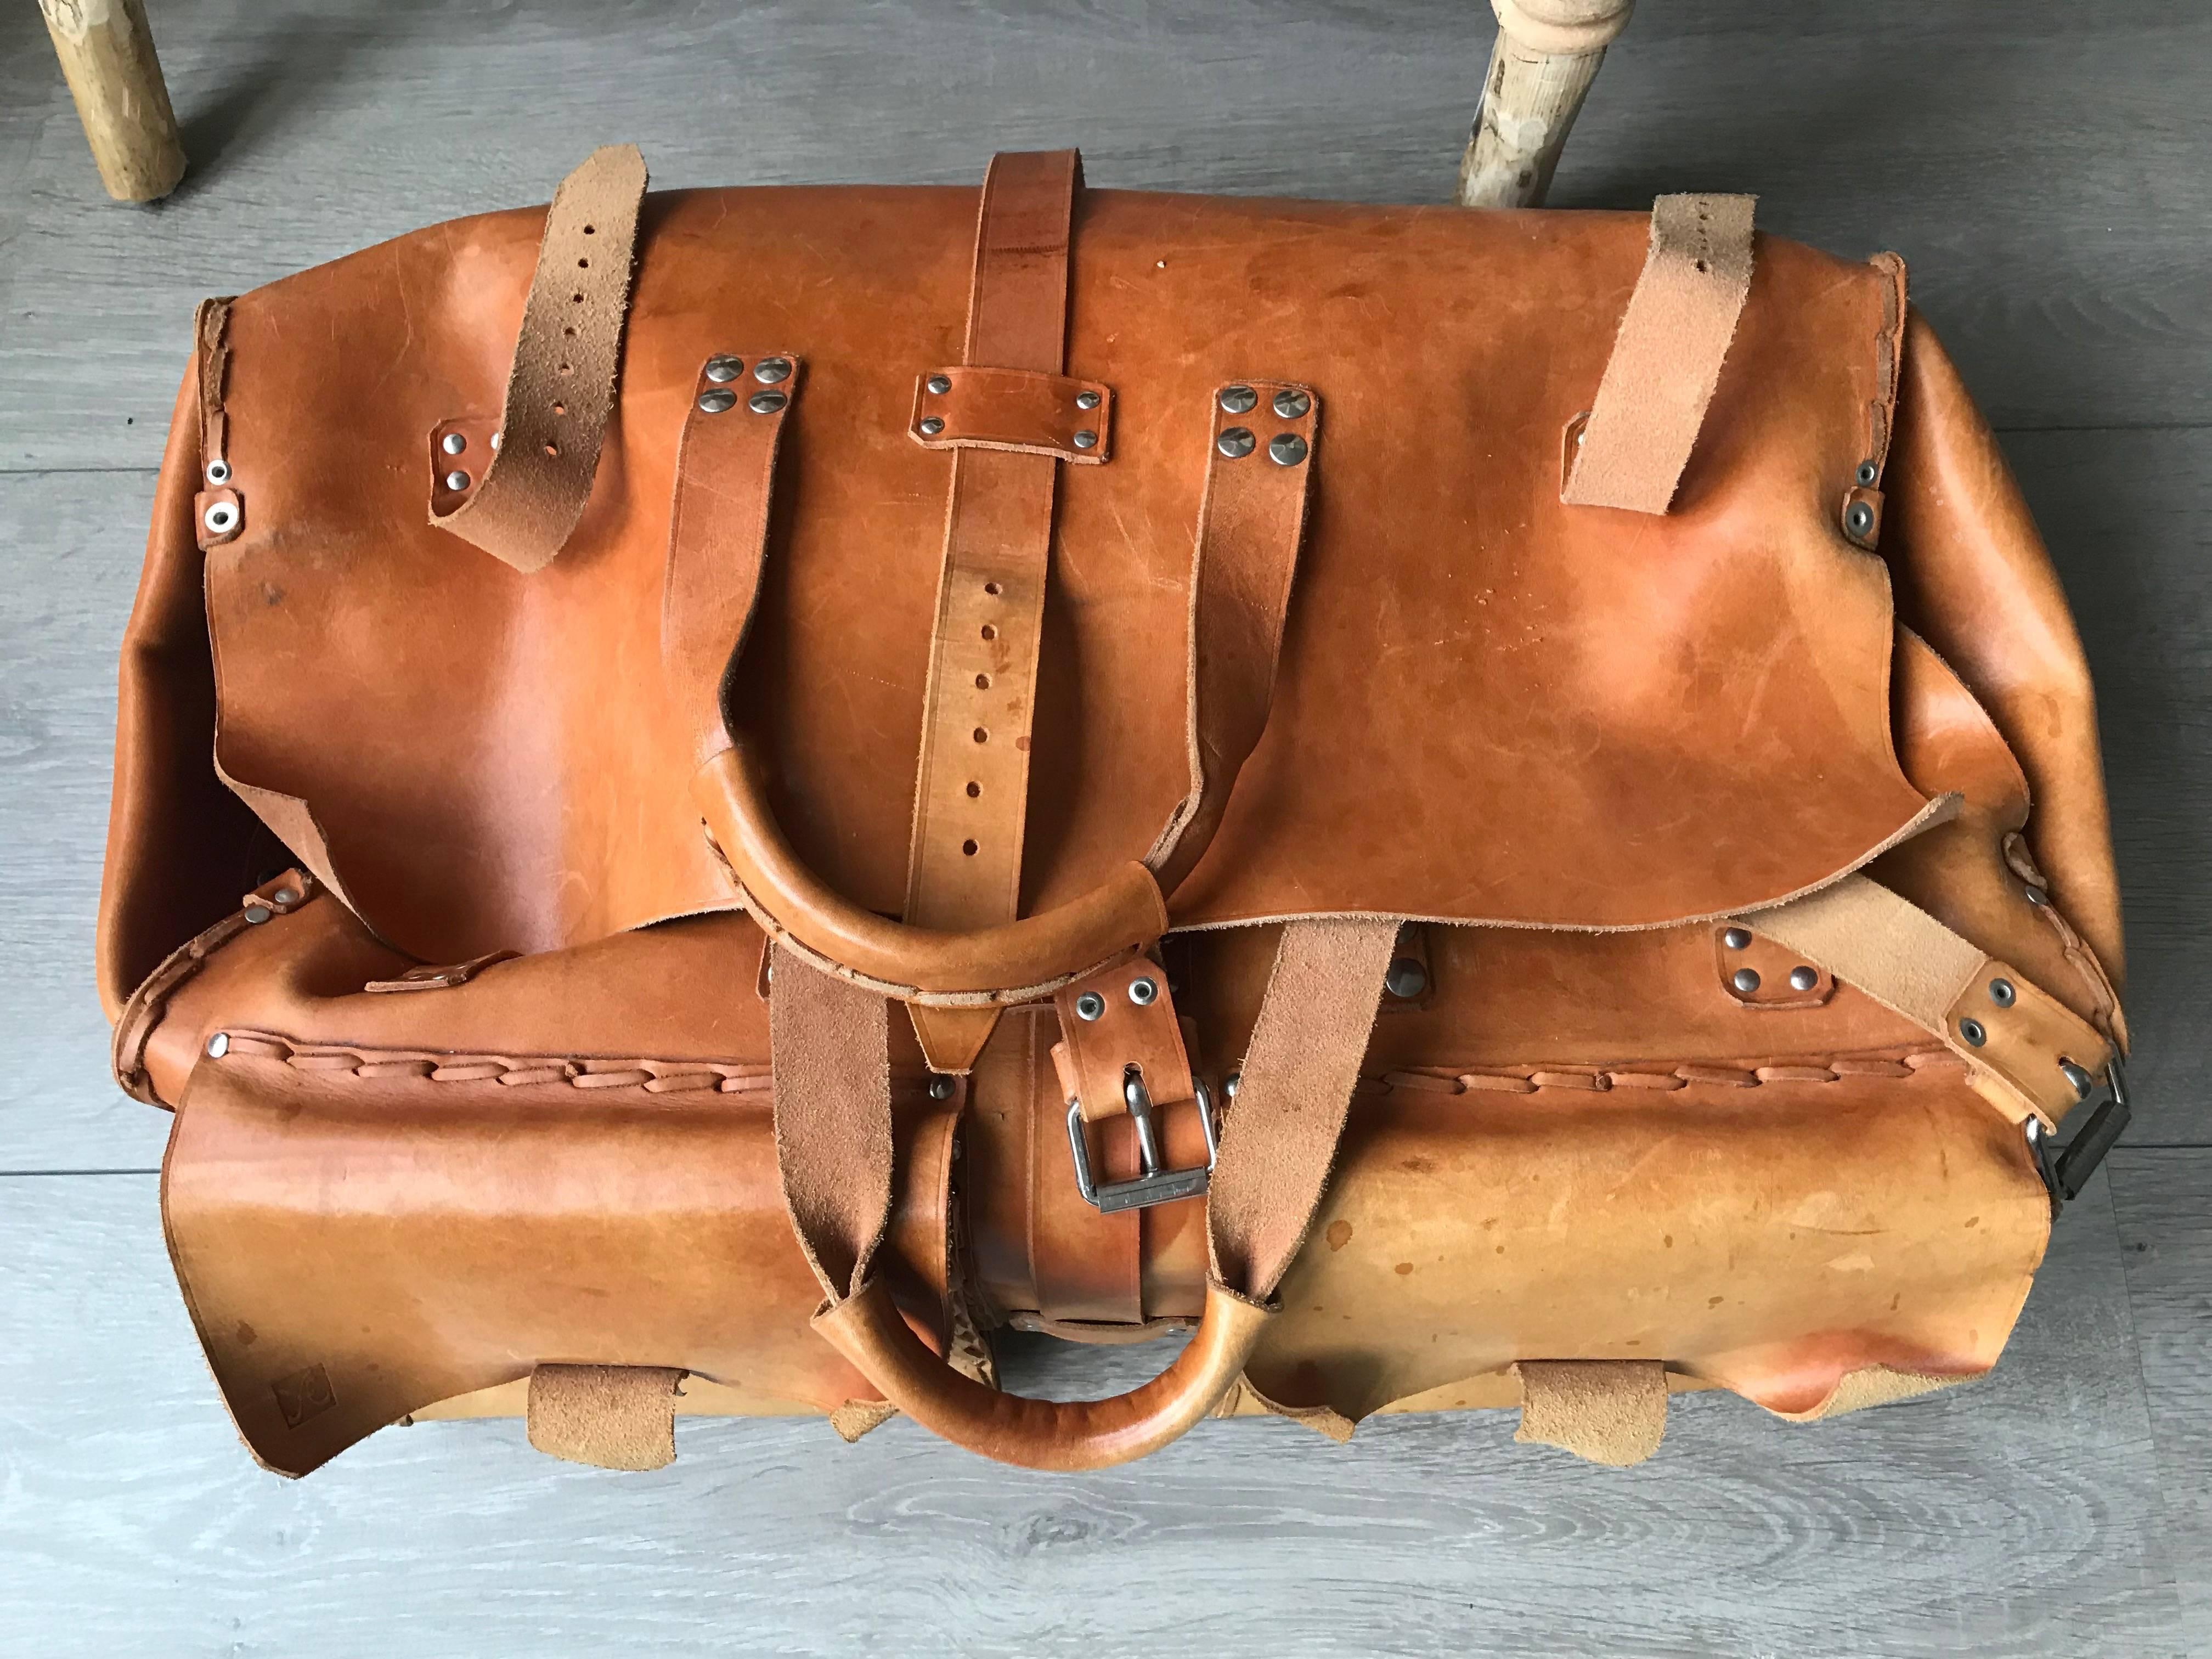 Cool leather bag that can be used for many purposes.

Those of you with a creative mind will immediately see there can be many more purposes to this stylish leather bag then what it was initially made for. The warm color and the wonderful shape make